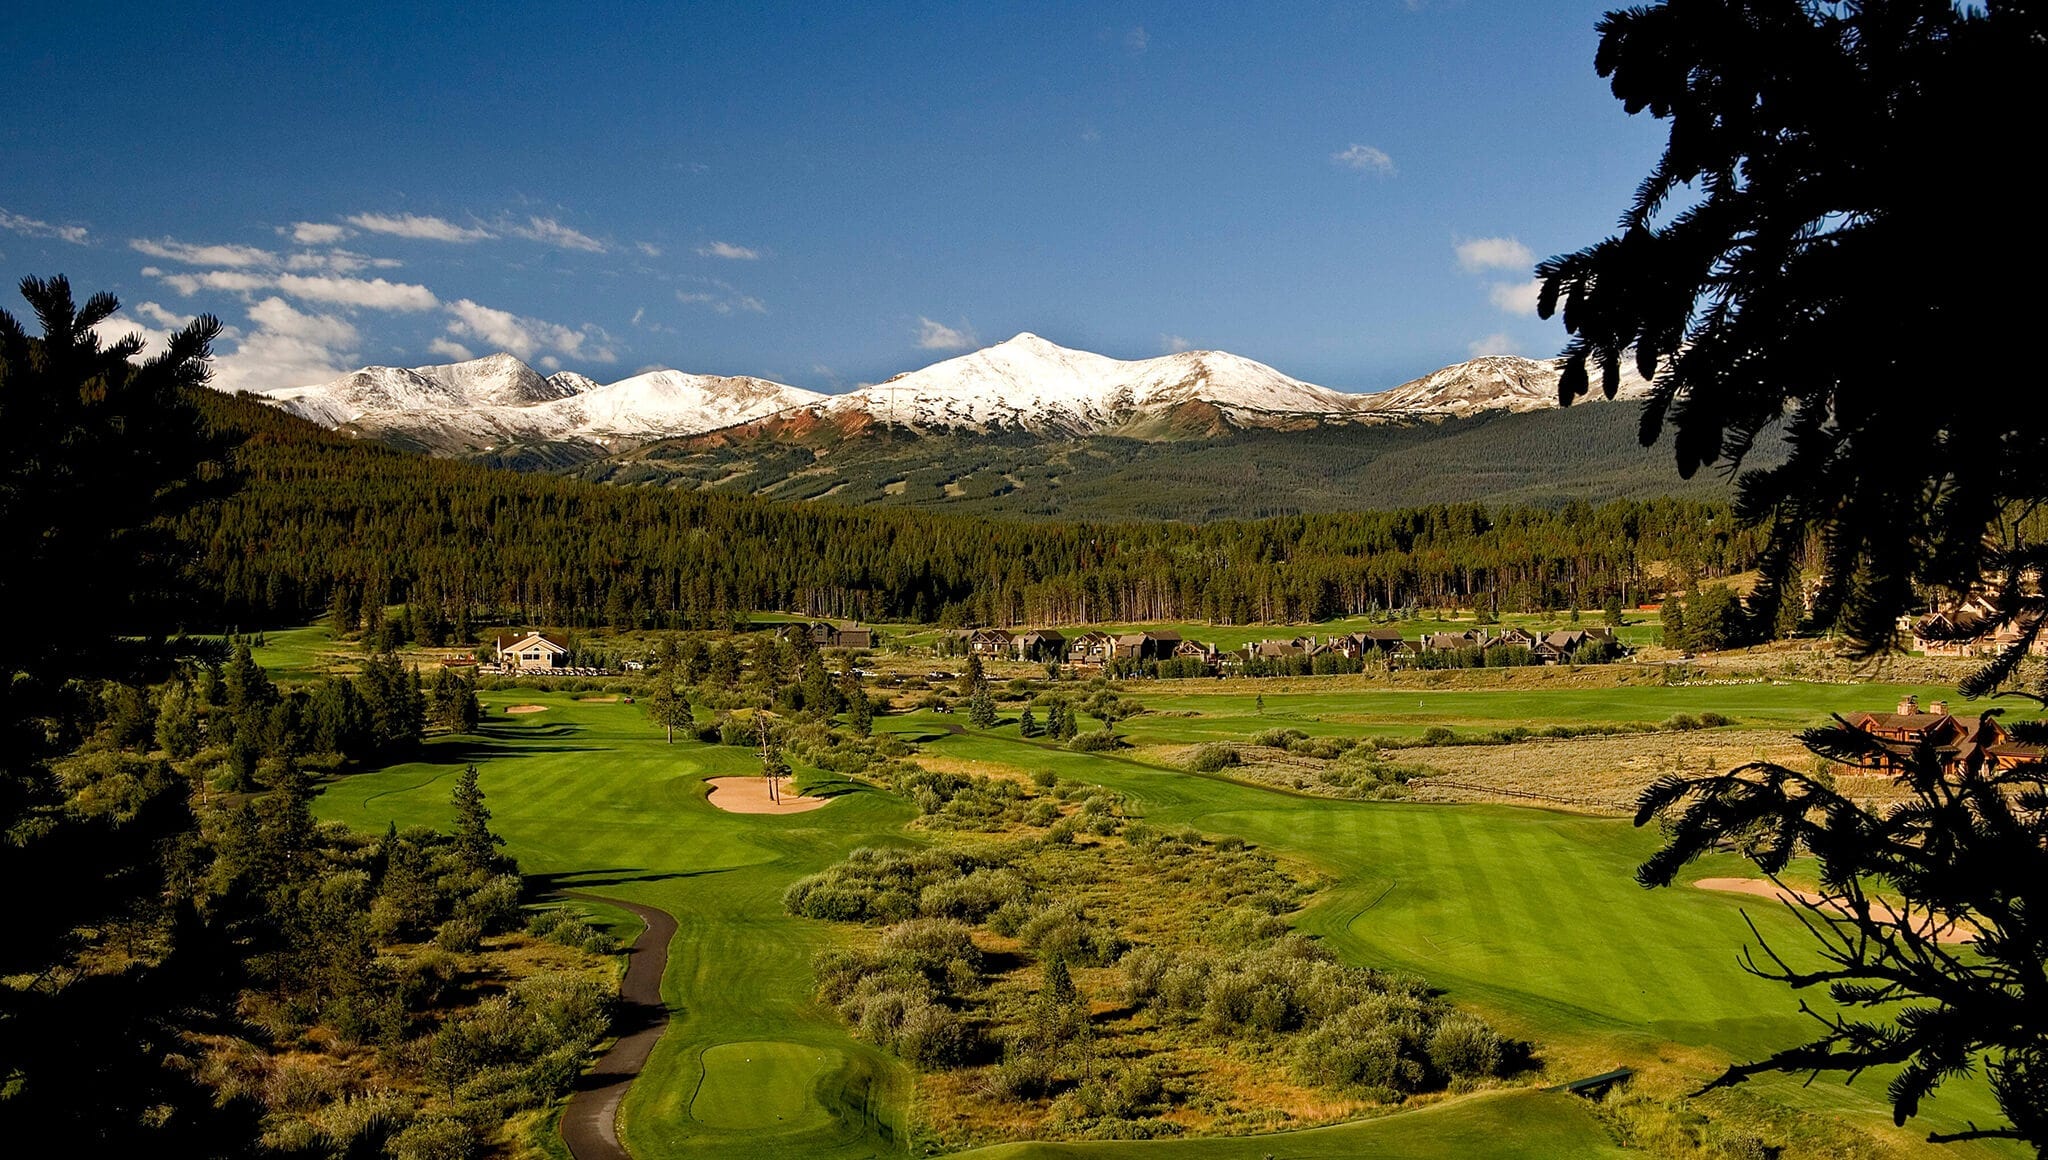 Overview of Breckenridge's Jack Nicklaus Golf Club with mountains in background.